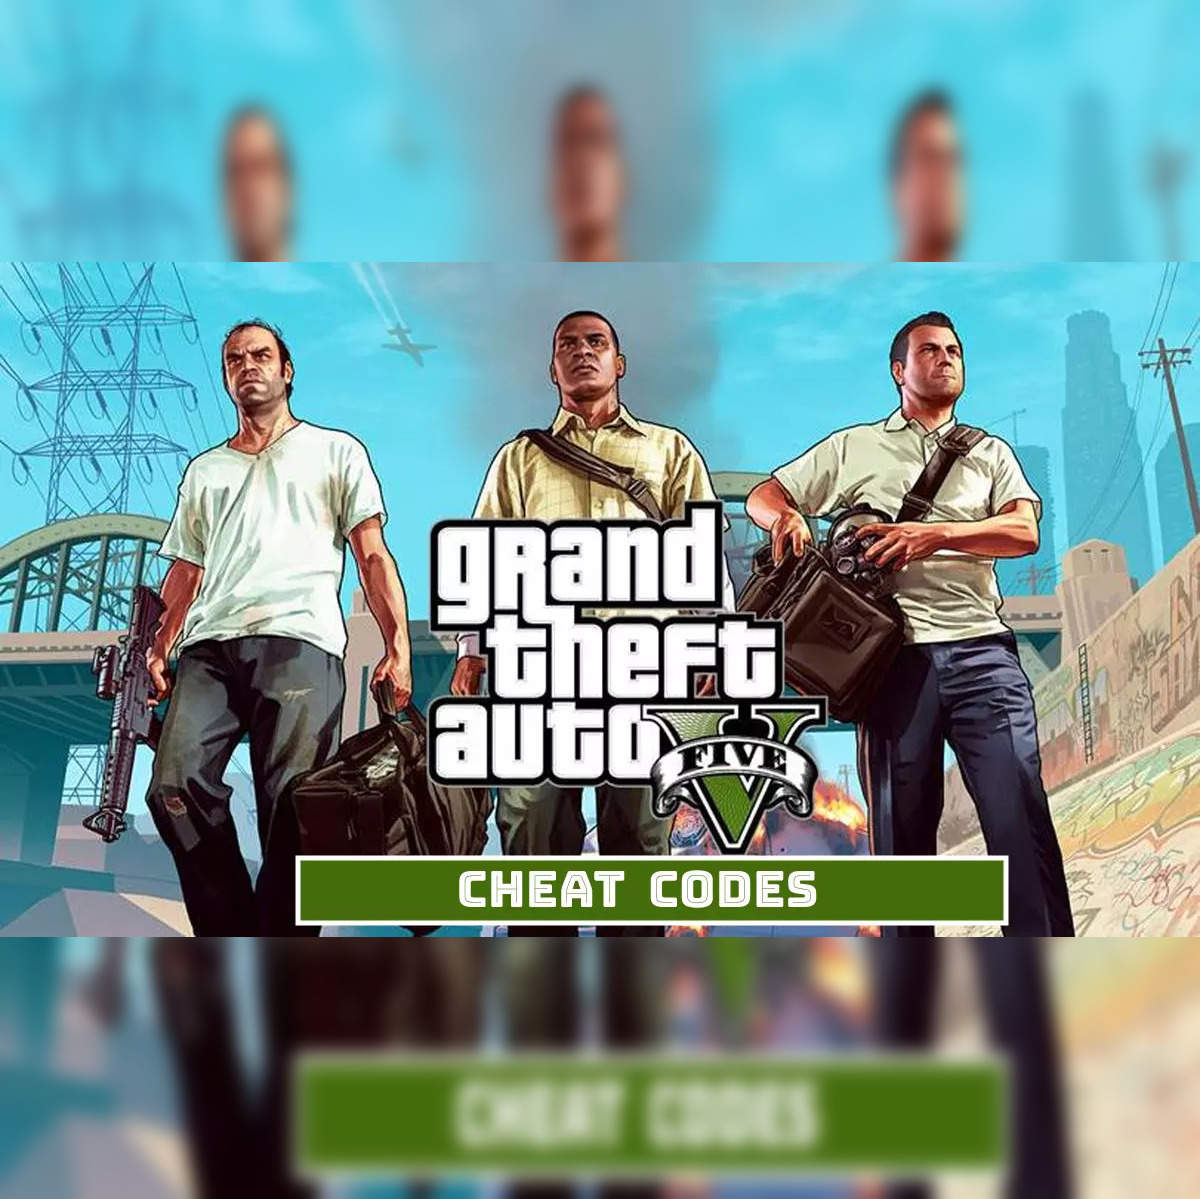 GTA 5 cheats, codes and phone numbers for Xbox, PS4, PS5 and PC GTA 5 cheats,  codes and phone numbers for all platforms